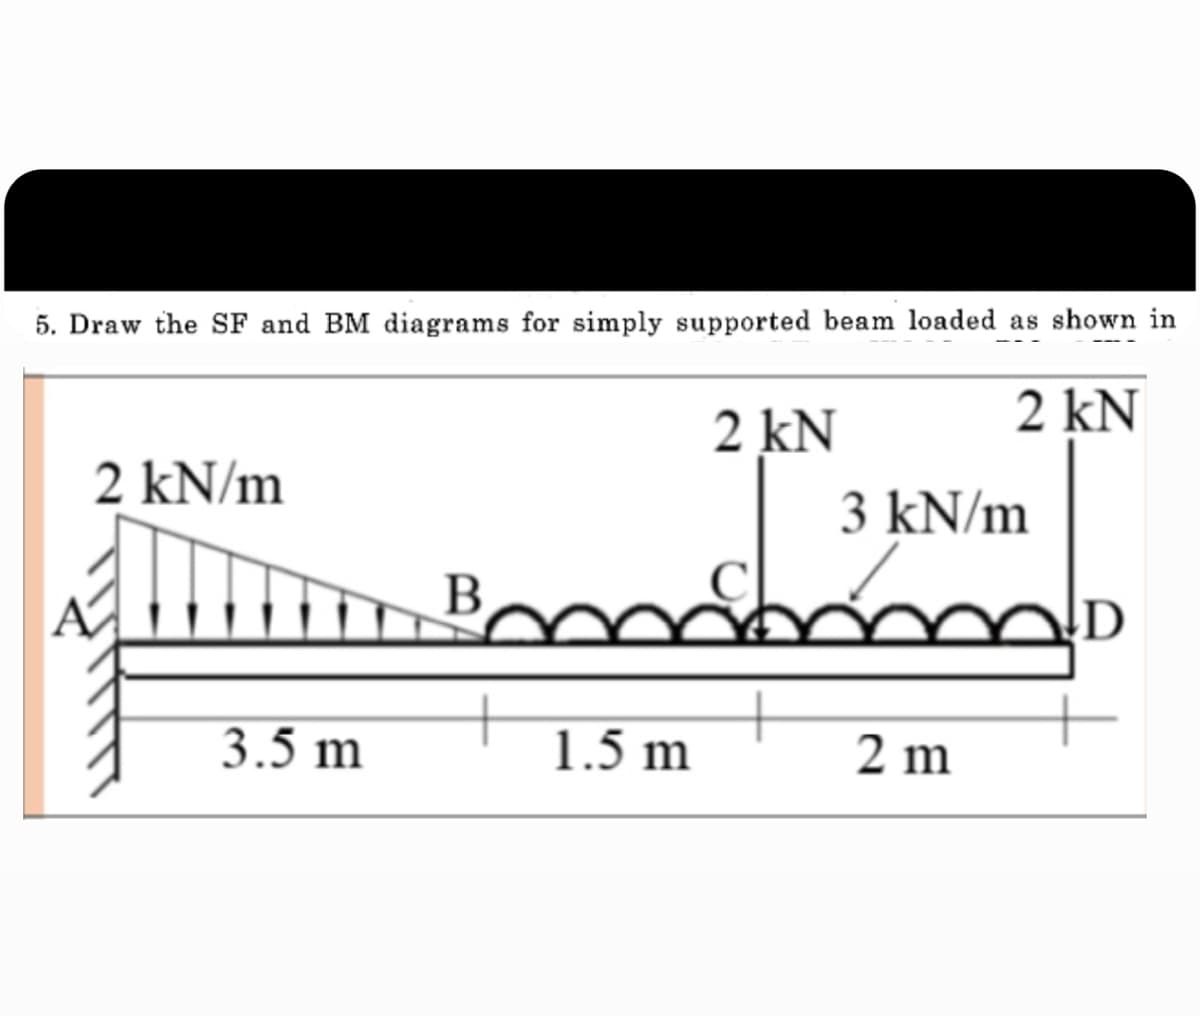 5. Draw the SF and BM diagrams for simply supported beam loaded as shown in
2 kN
2 kN
2 kN/m
3 kN/m
B
D
3.5 m
1.5 m
2 m
